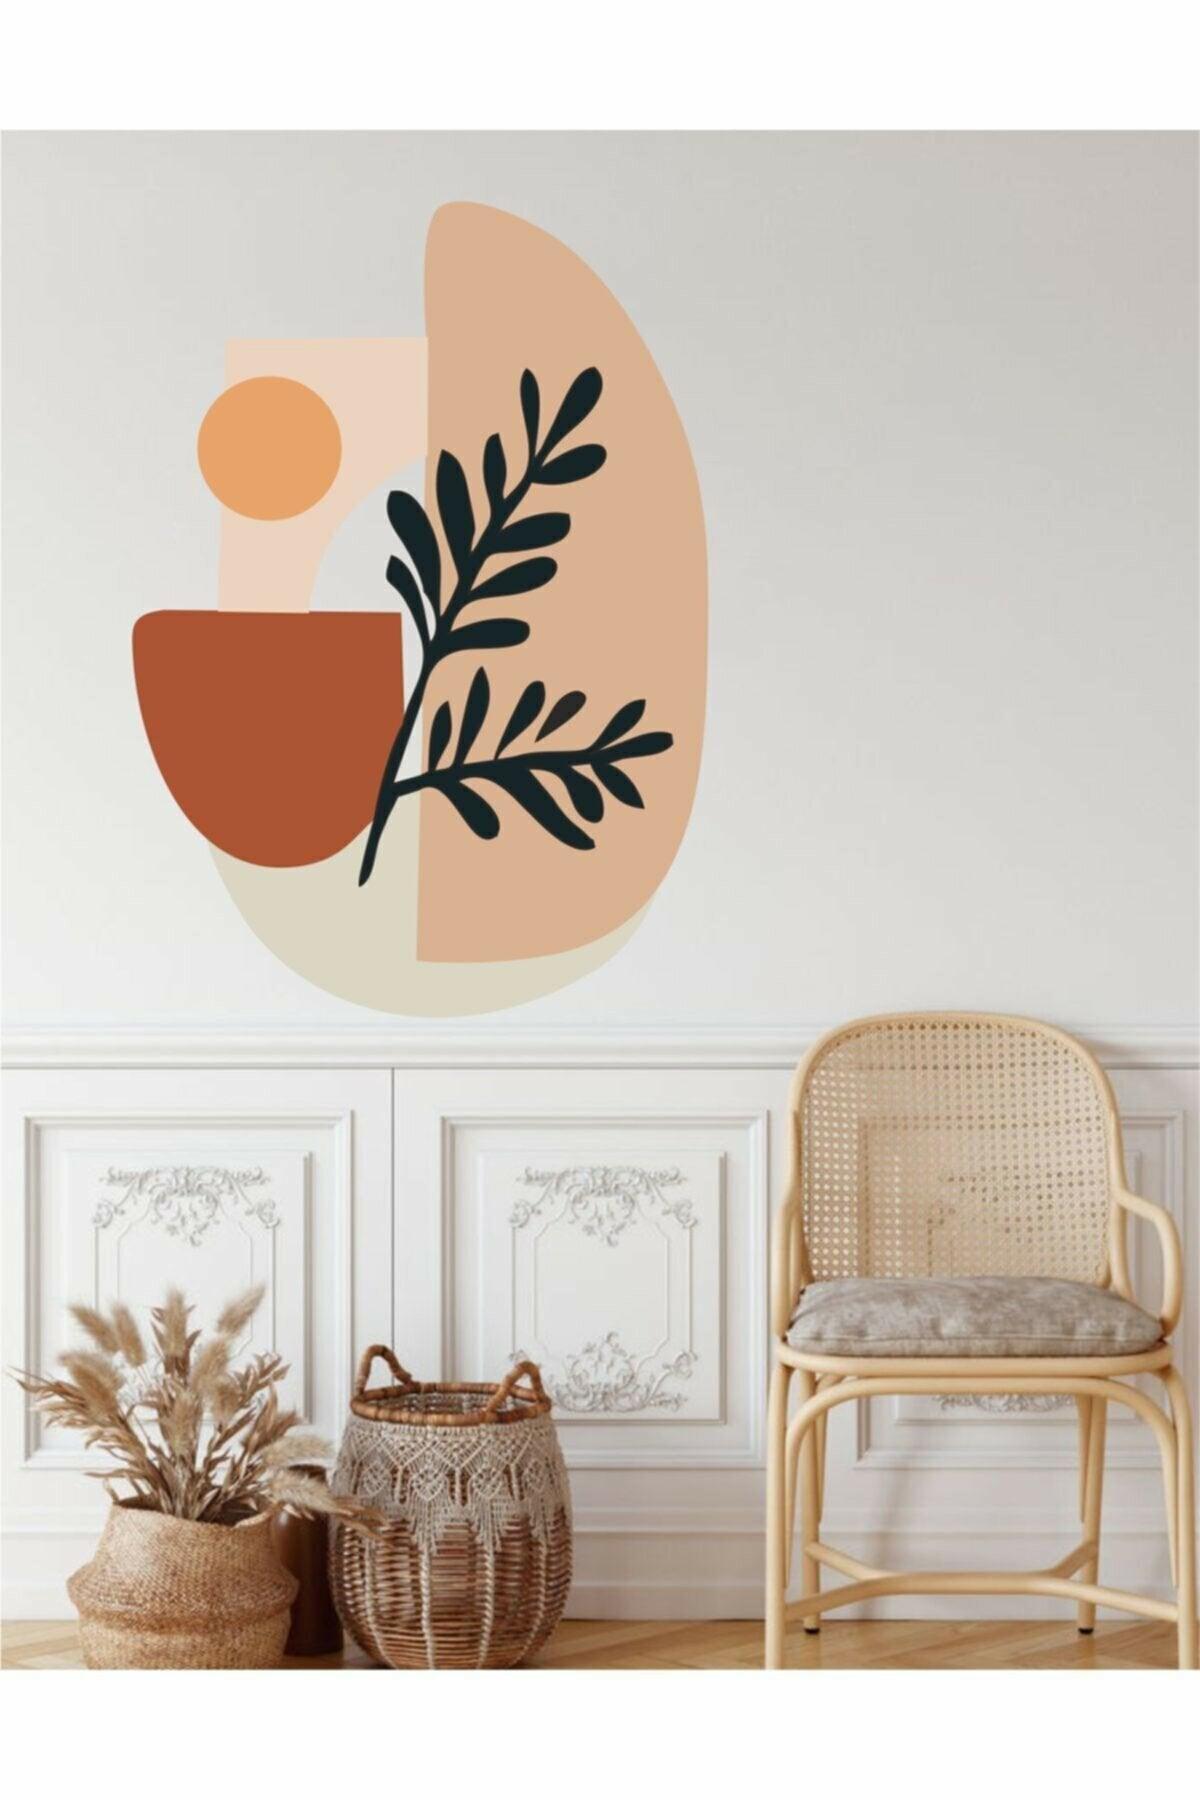 Sunrise Wall Decal - Brooklyn Home - Watch Stickers & Decals